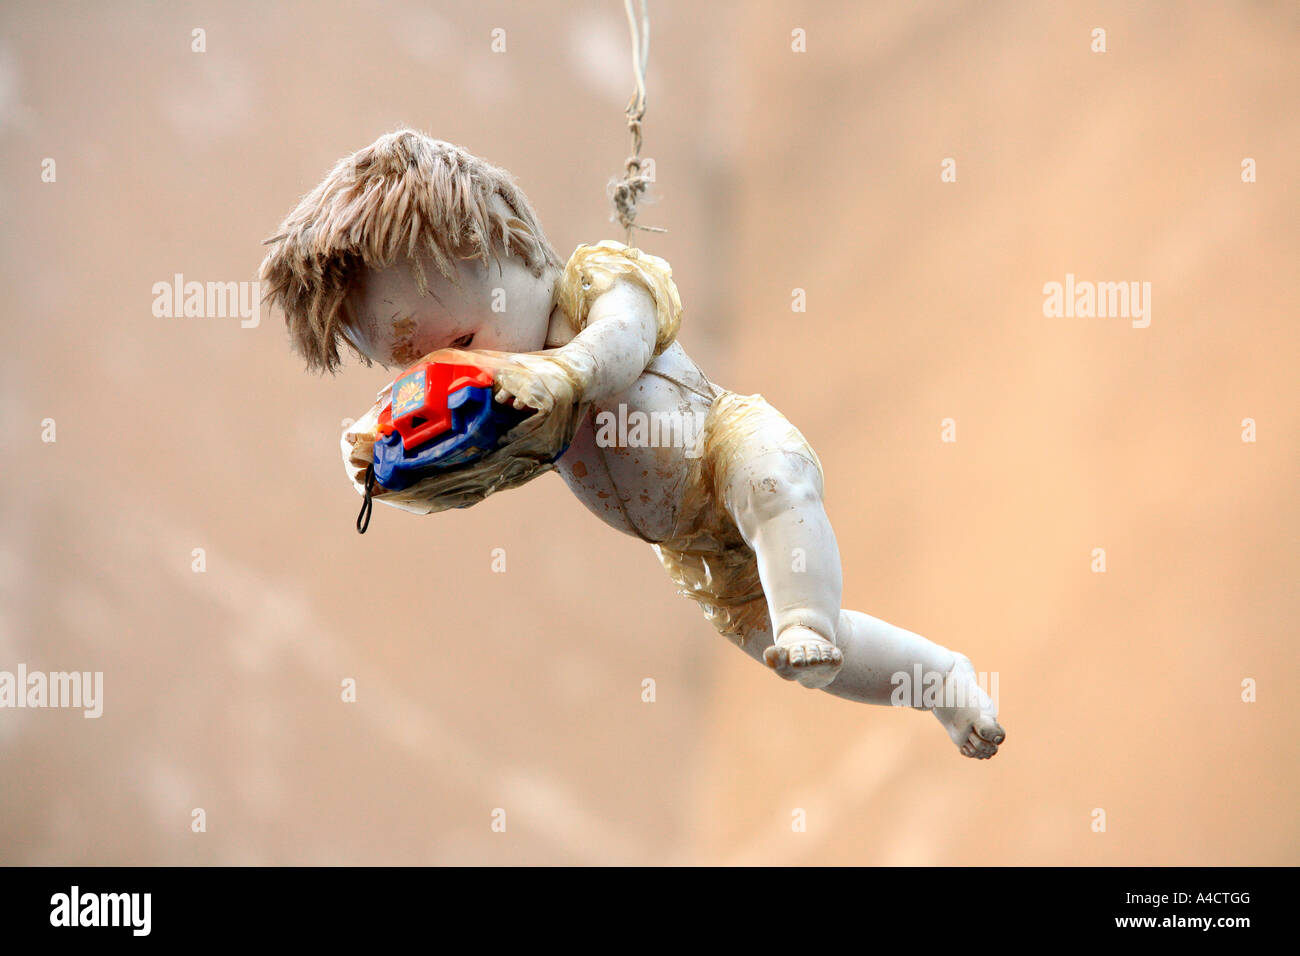 Old doll holding Viewmaster hanging in the air Stock Photo